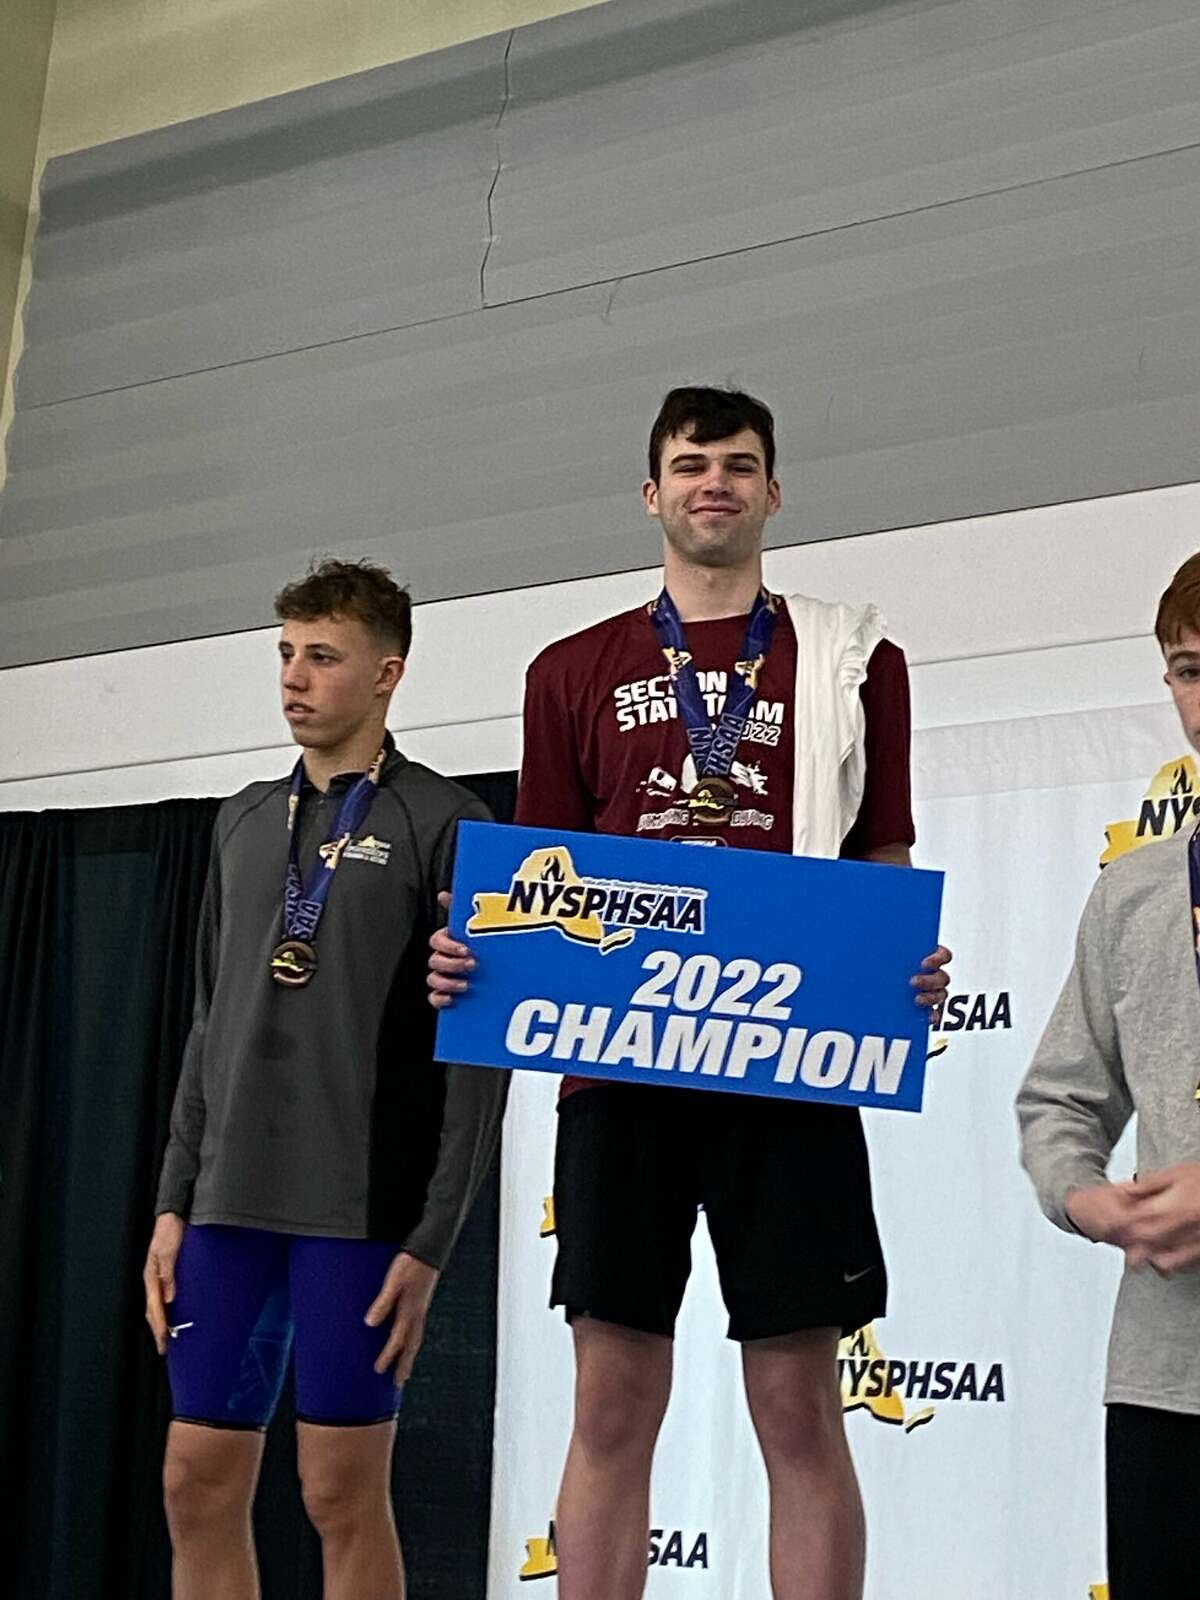 Burnt Hills/Scotia swimmer Sam Brown won the 100 backstroke at the state meet at Ithaca College and was a member of the winning 200 medley relay.